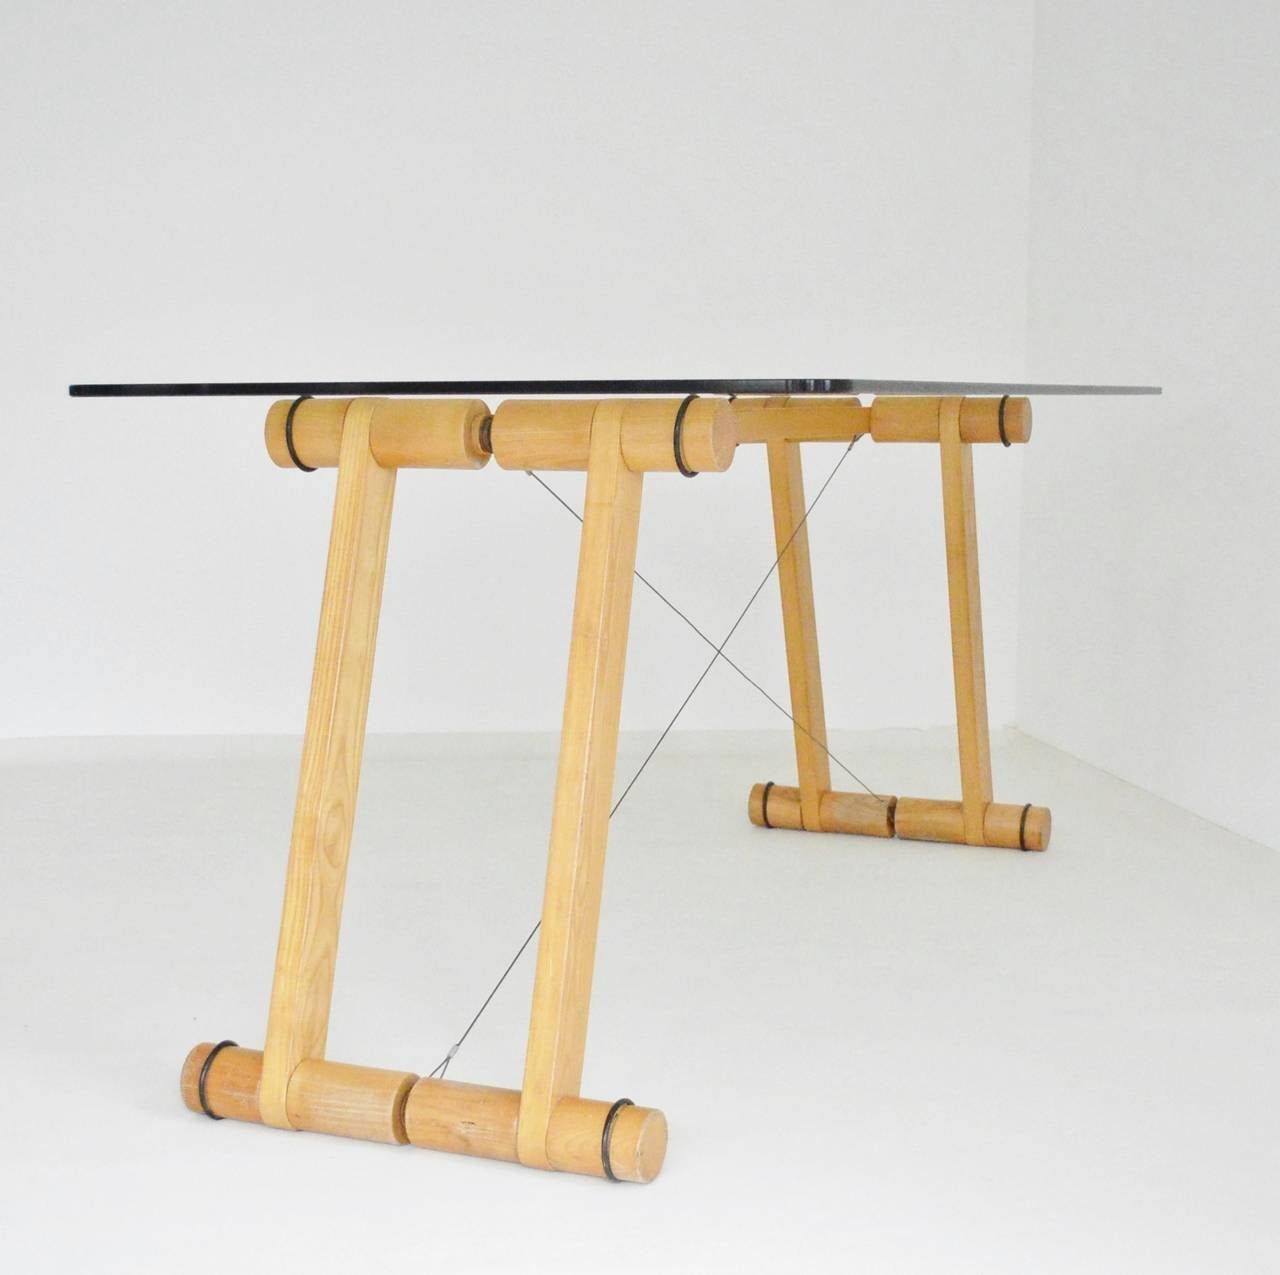 A pine framed and glass topped architects table braced with steel cable. Superstudio led the way for a group of Italian architects that had become disillusioned with modernist utopian principles which they believed had hit intellectual stasis by the